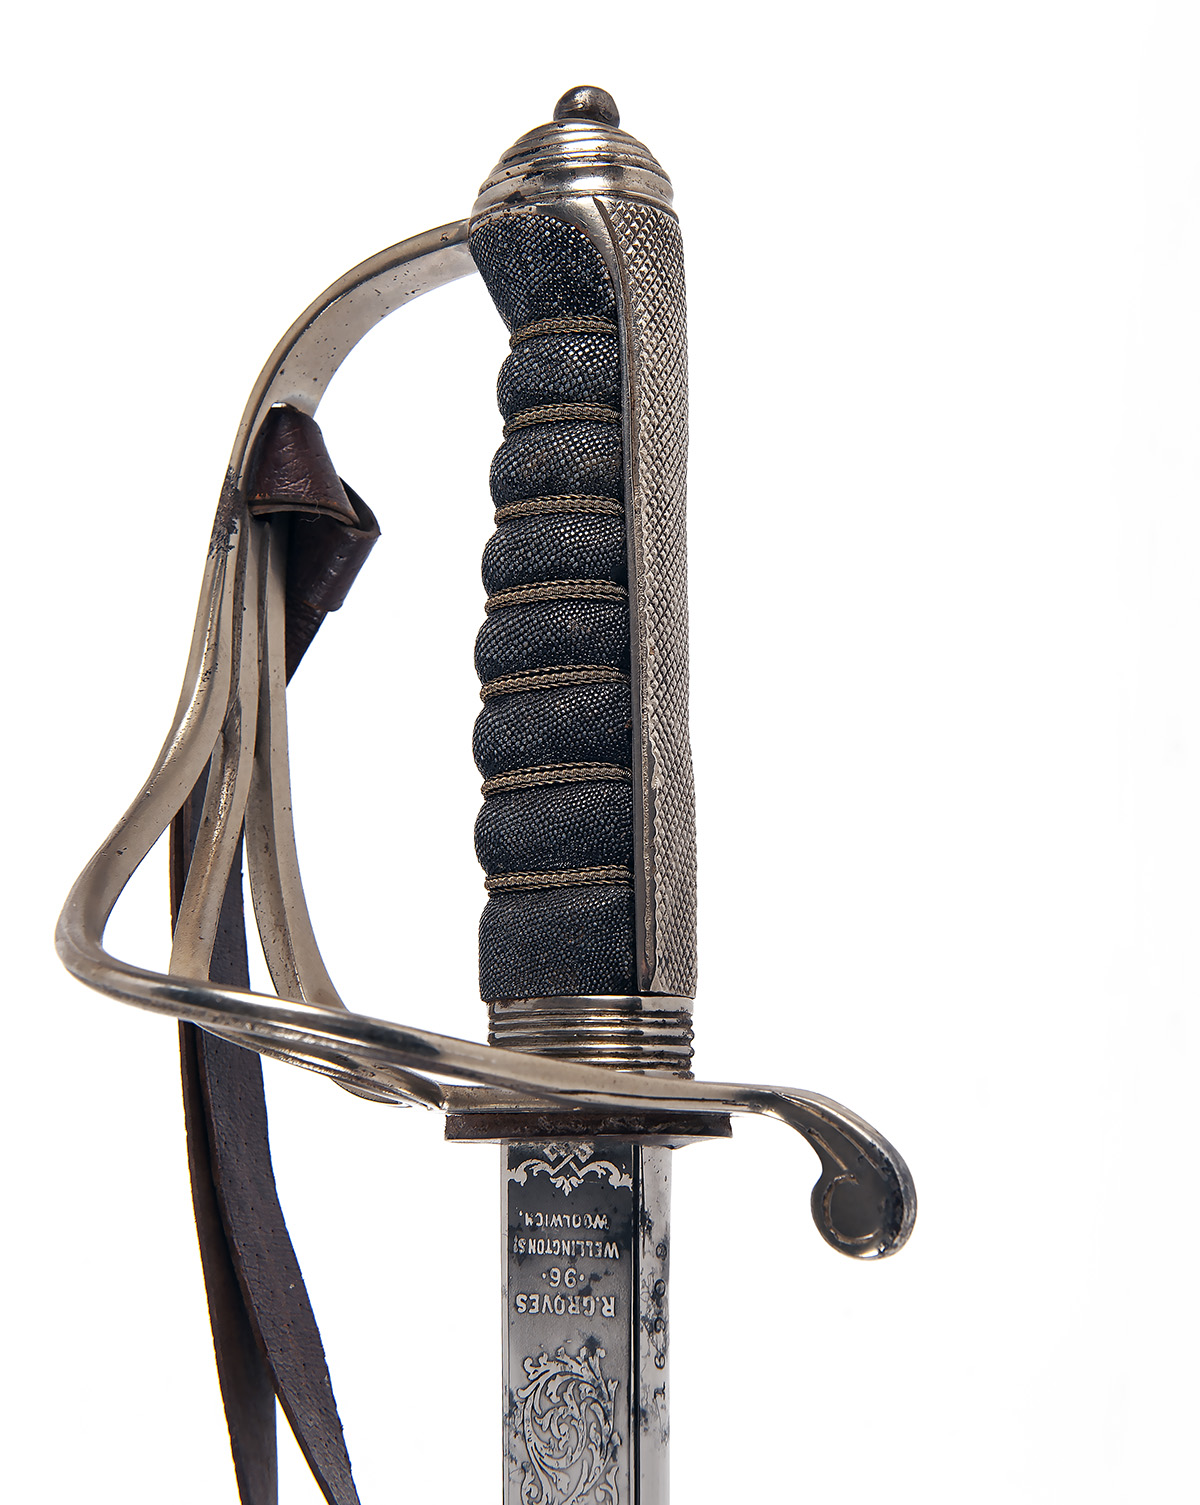 R. GROVES, WOOLWICH A BRITISH 1821 ARTILLERY OFFICER'S SWORD, circa World War One, with slightly - Image 2 of 4